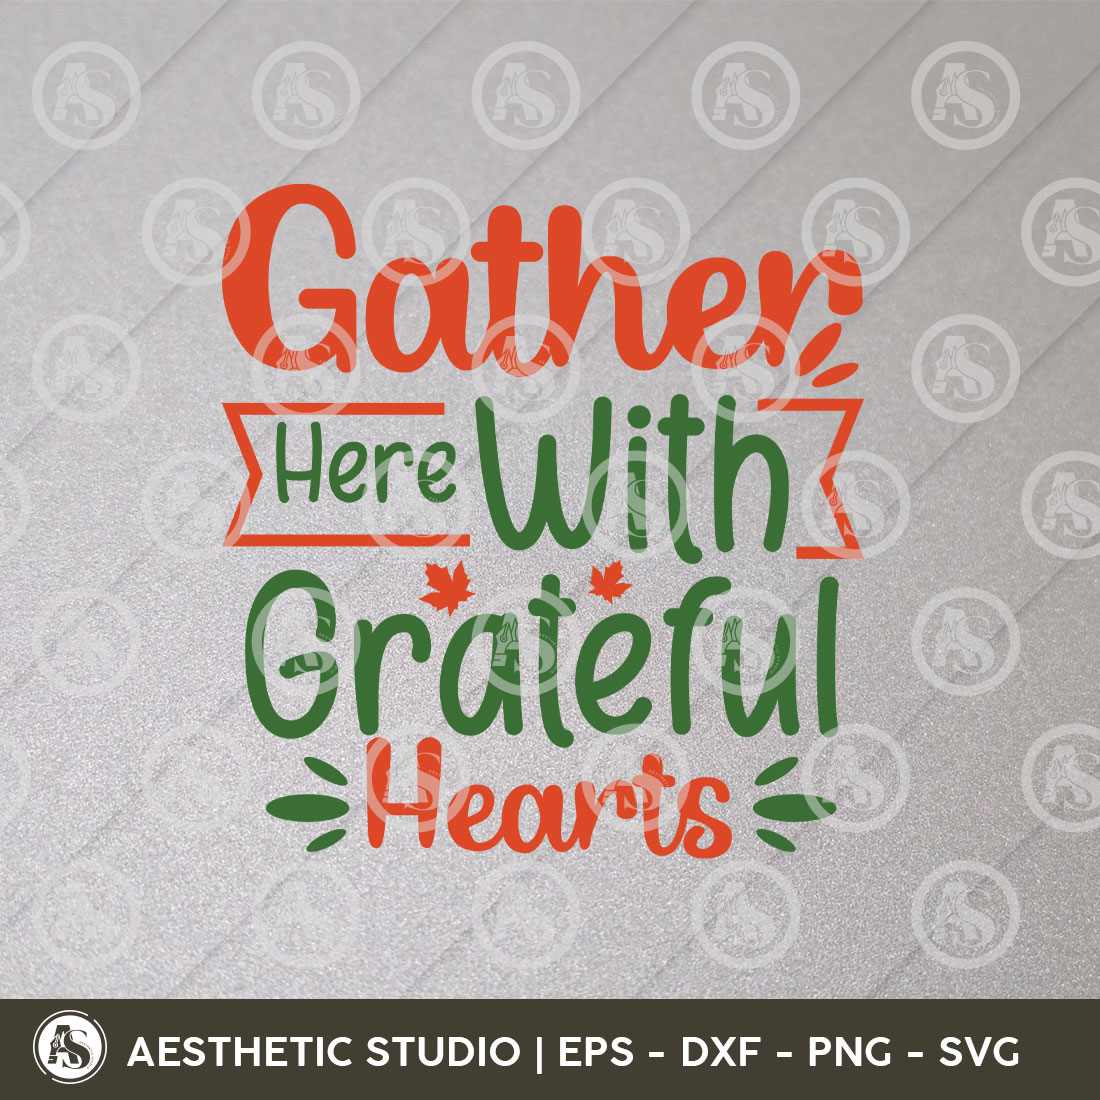 bt0107 gather here with grateful hearts 02 931